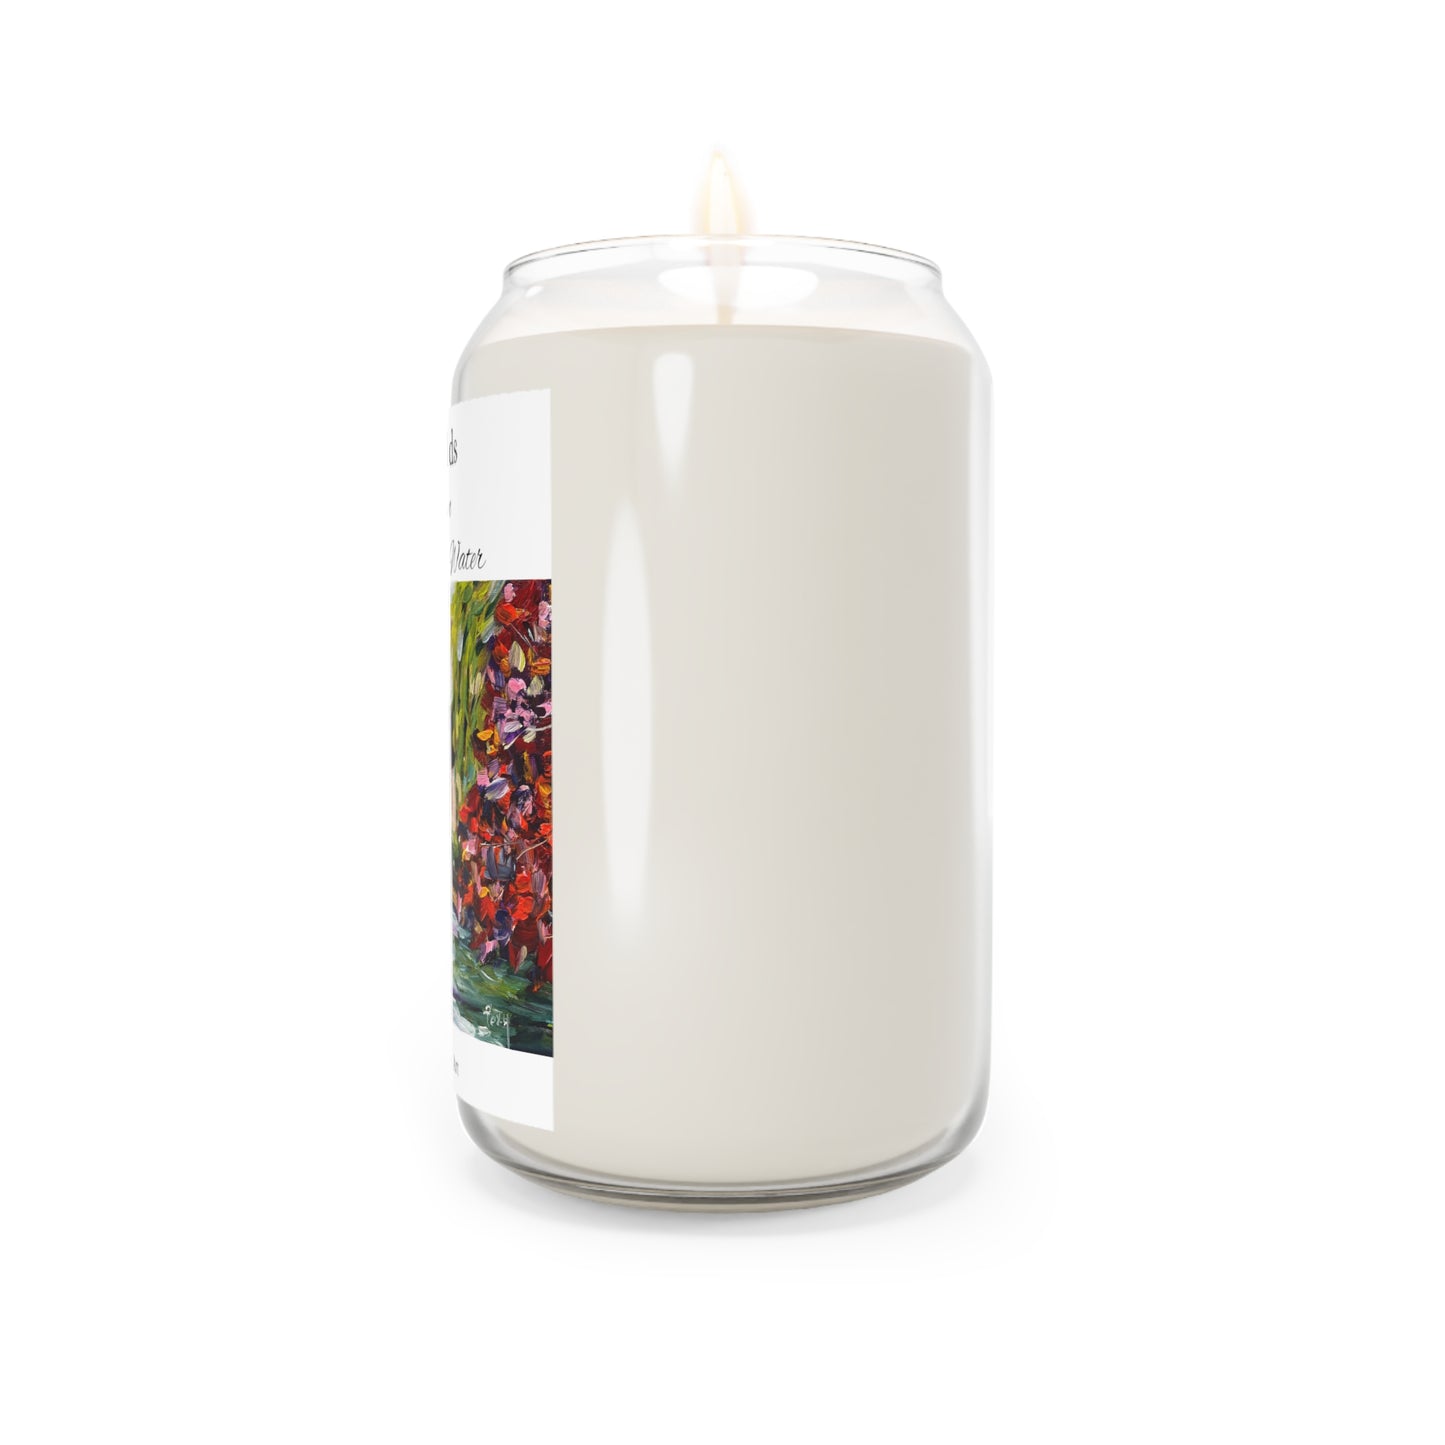 Autumn in Bourton on the Water Cotswolds Scented Candle, 13.75oz